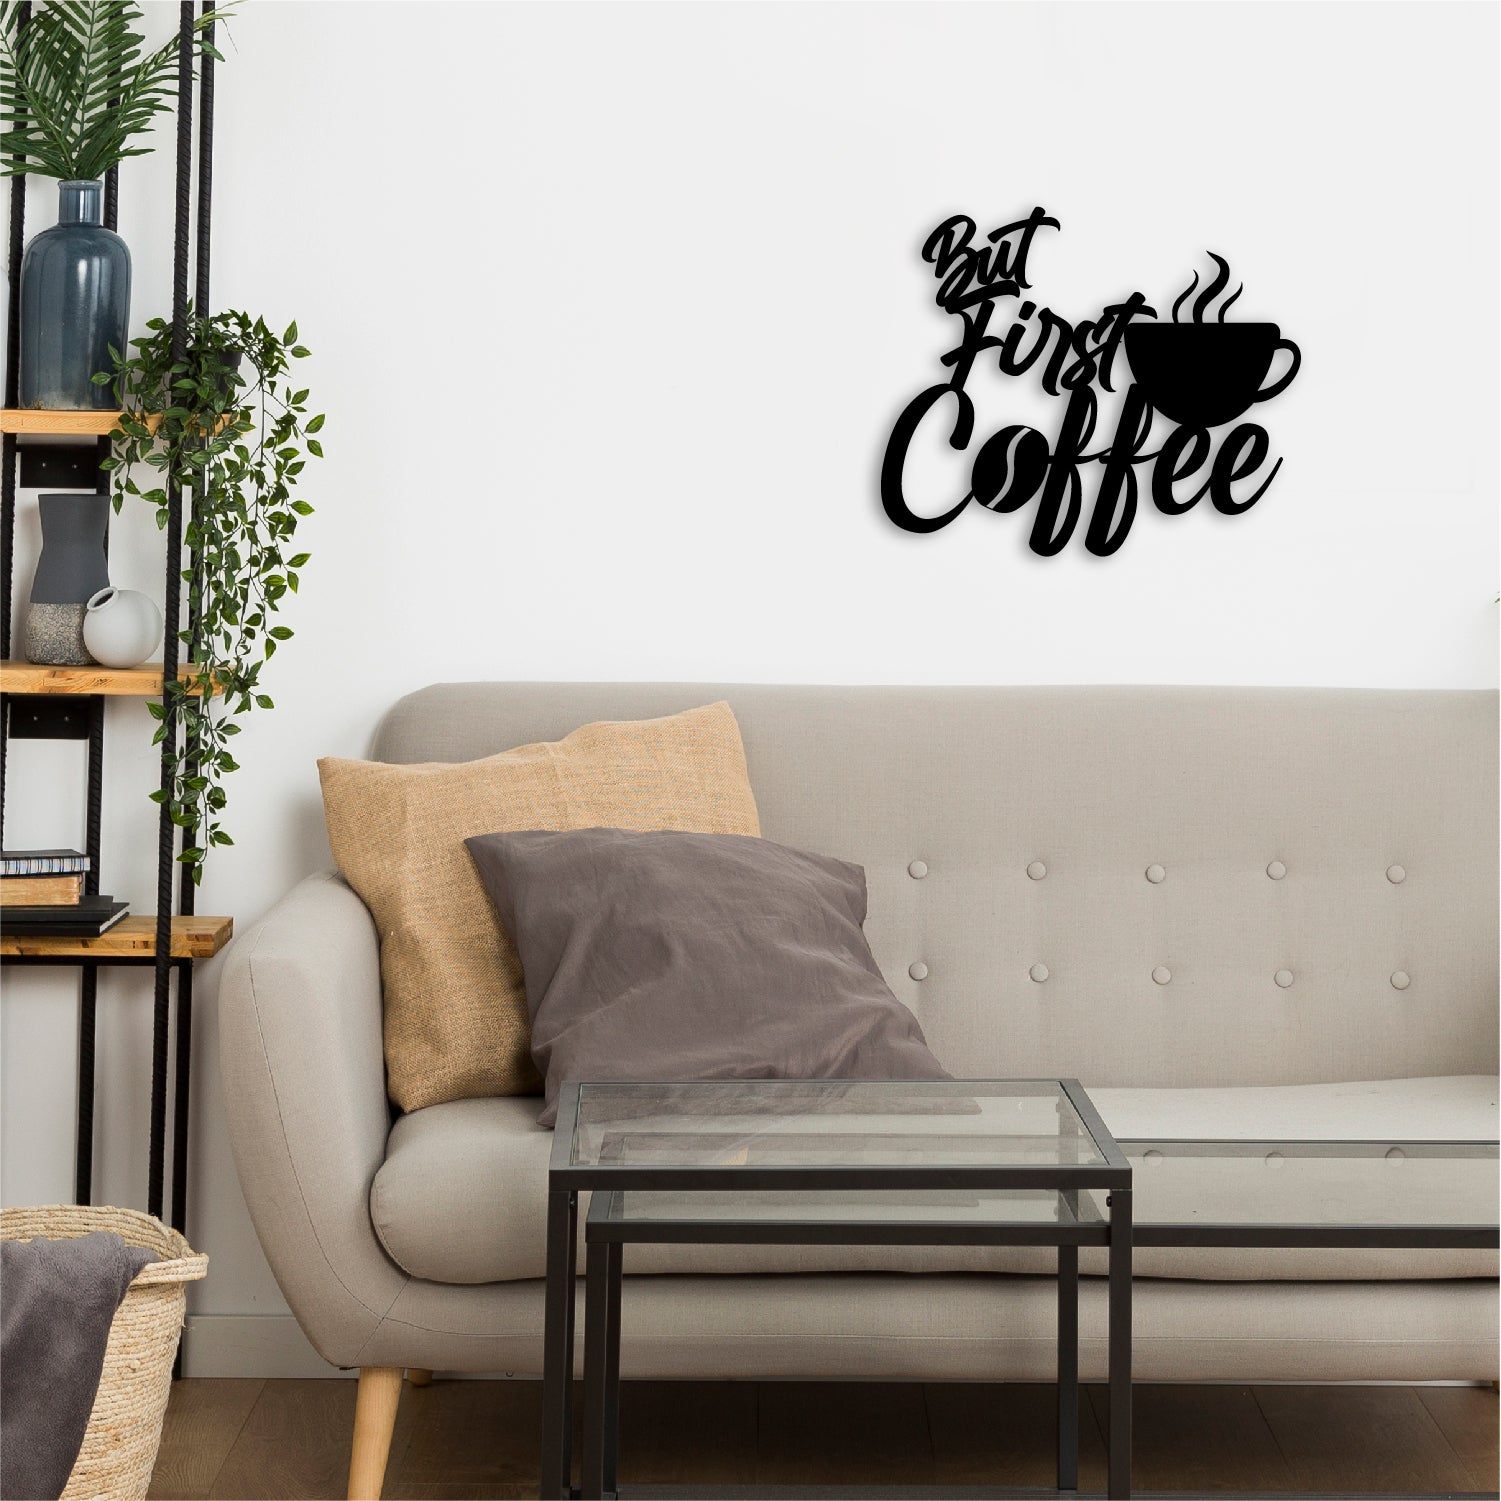 But First Coffee With Mugblack Engineered Wood Wall Art Cutout, Ready To Hang Home Decor 4